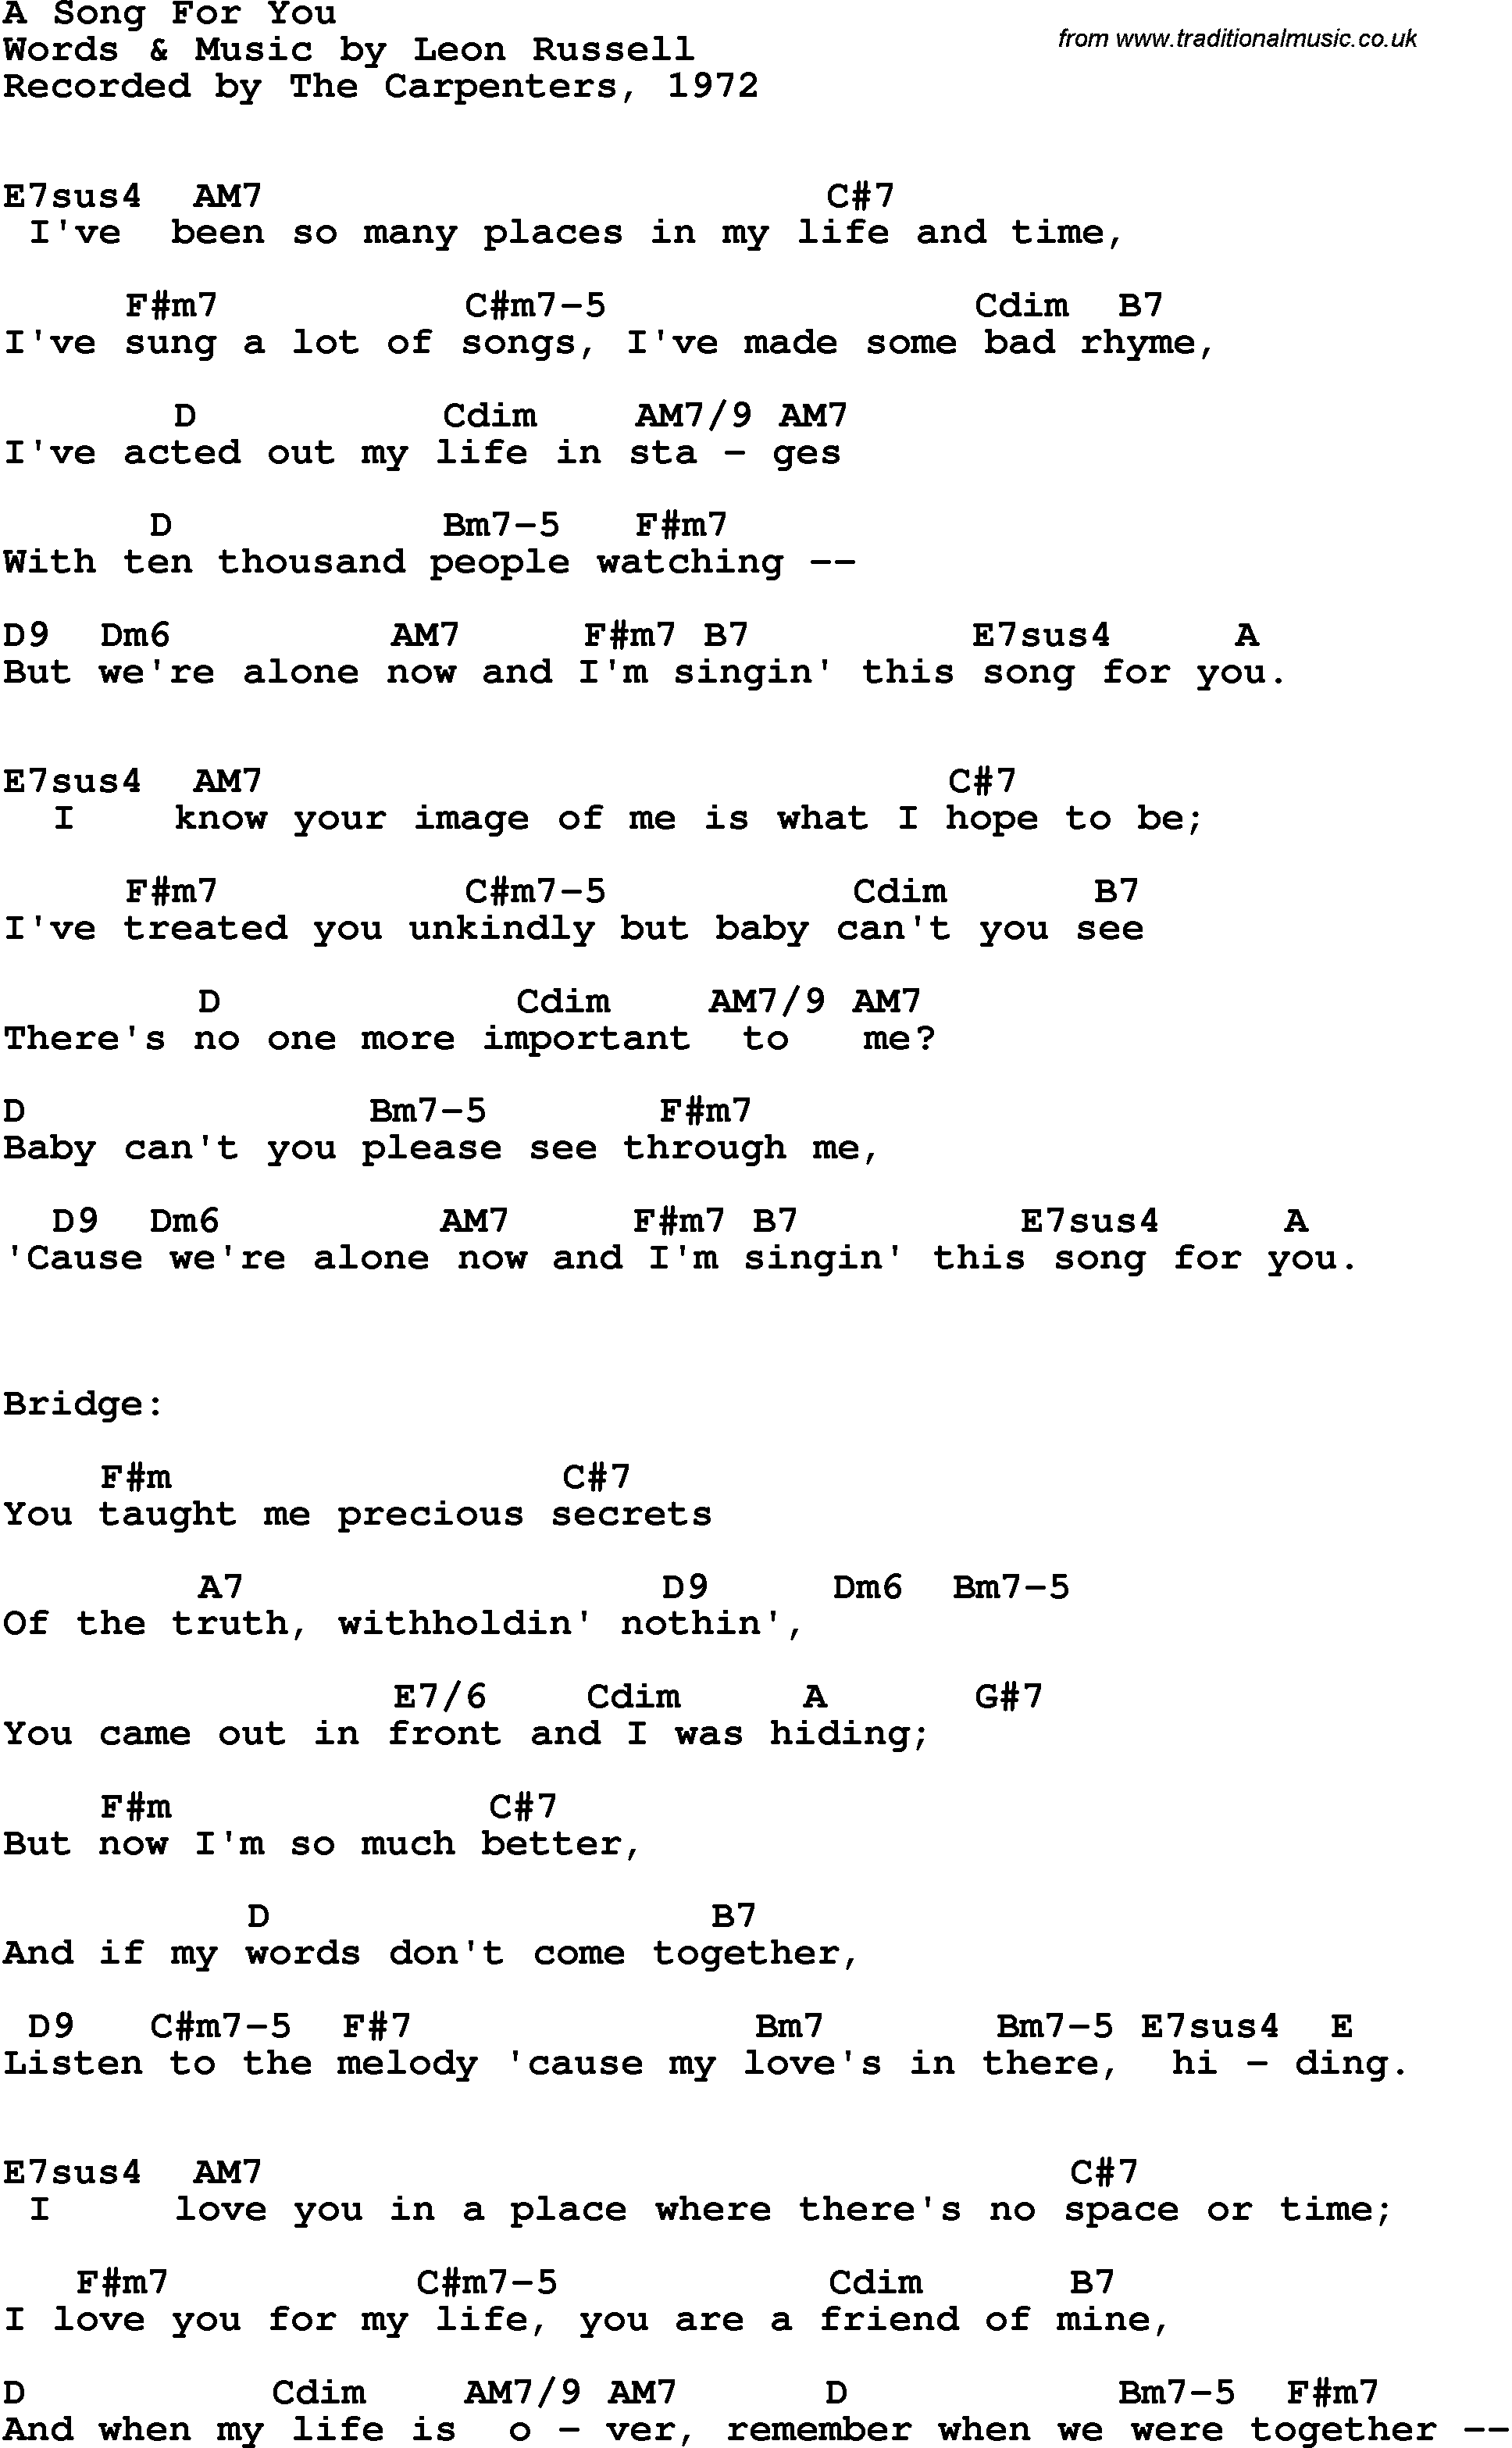 Song Lyrics with guitar chords for A Song For You - The Carpenters, 1972